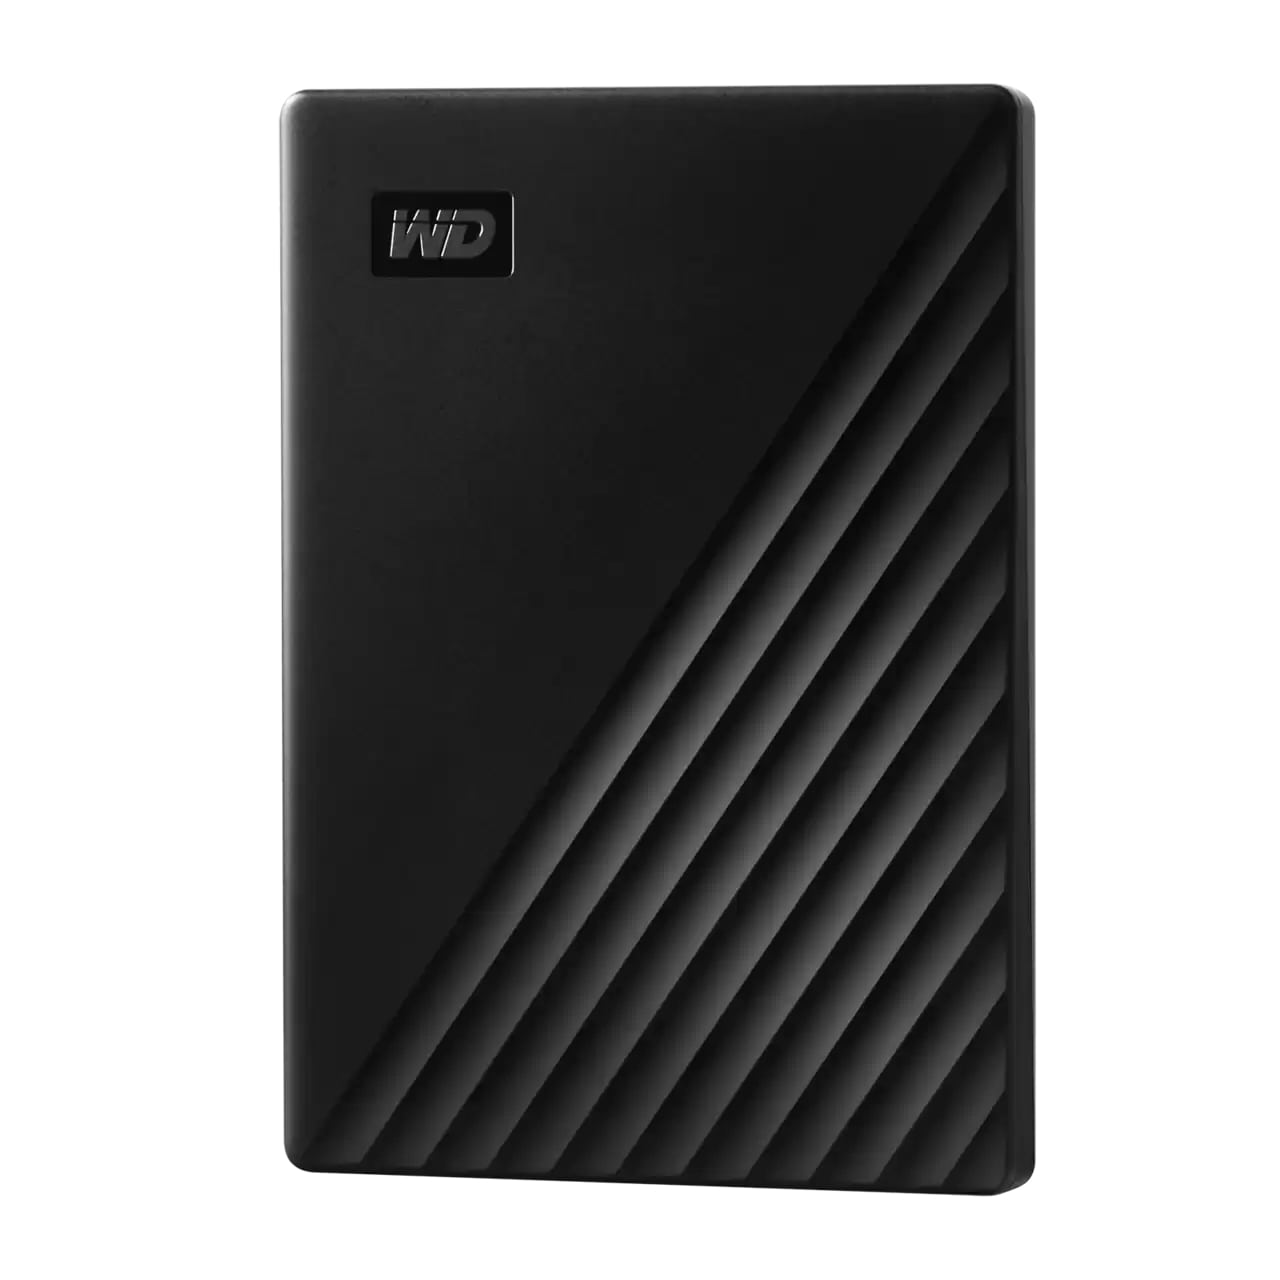 WD My Passport USB 2.0 Portable External Hard Drive with 480MB/s Read Speed for PC (1TB) | Western Digital